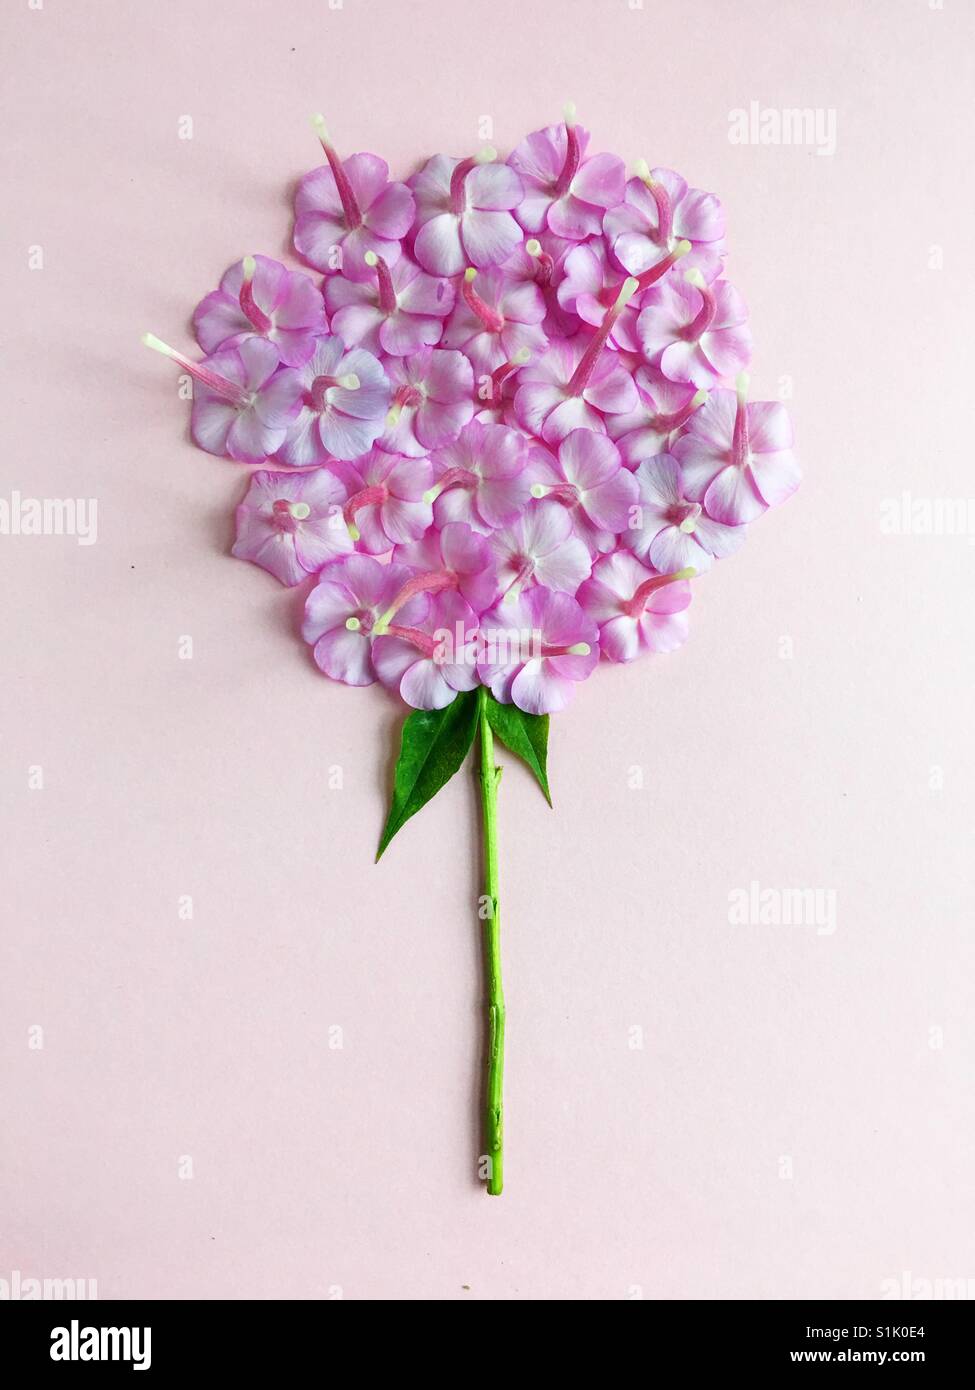 Phlox flower, deconstructed and reimagined. Stock Photo